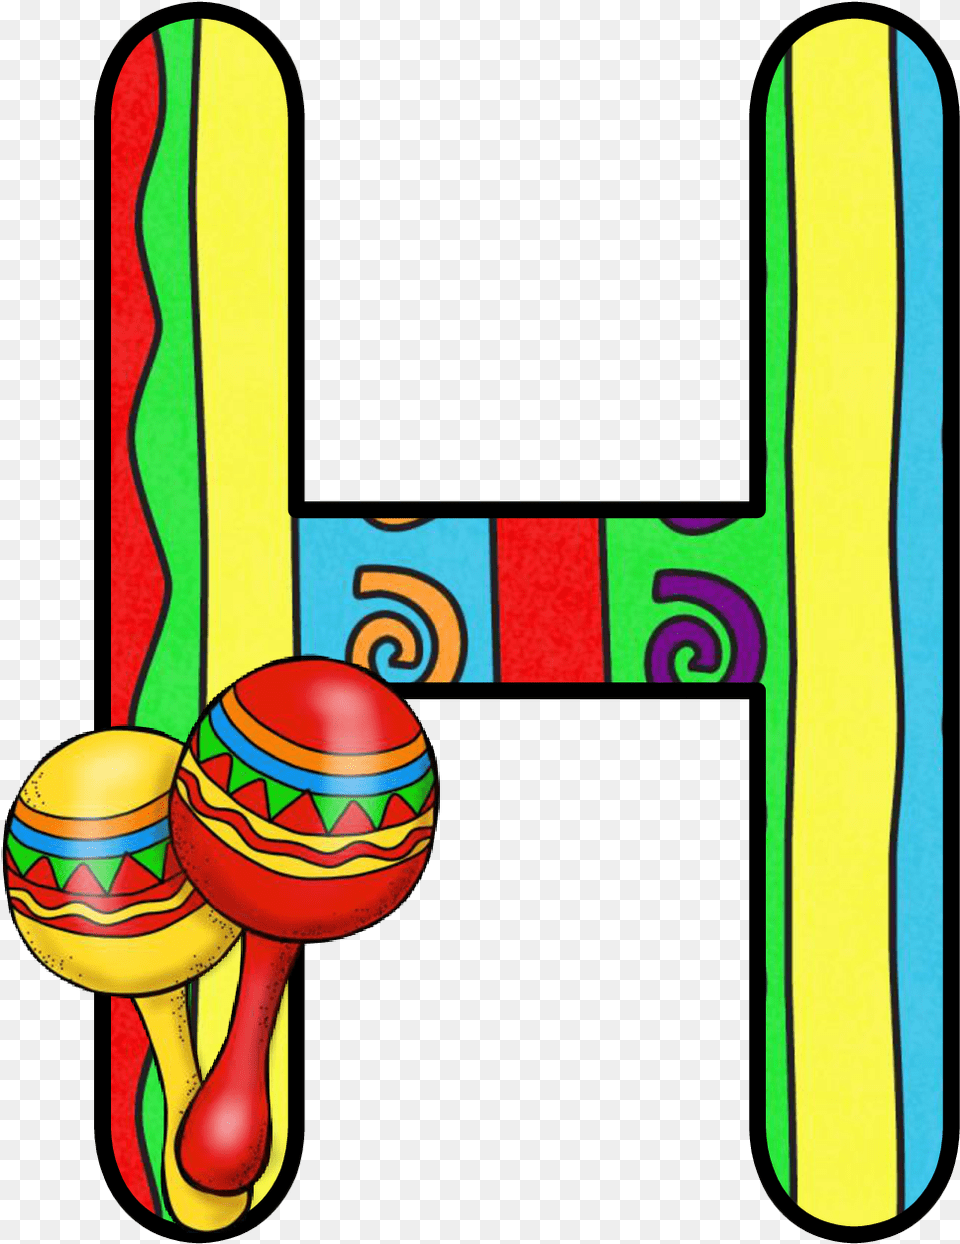 Ch B Alfabeto May 5 Th De Kid Sparkz Https May 5 Letters Mexican Fiesta Party Decorated Letters, Maraca, Musical Instrument Free Png